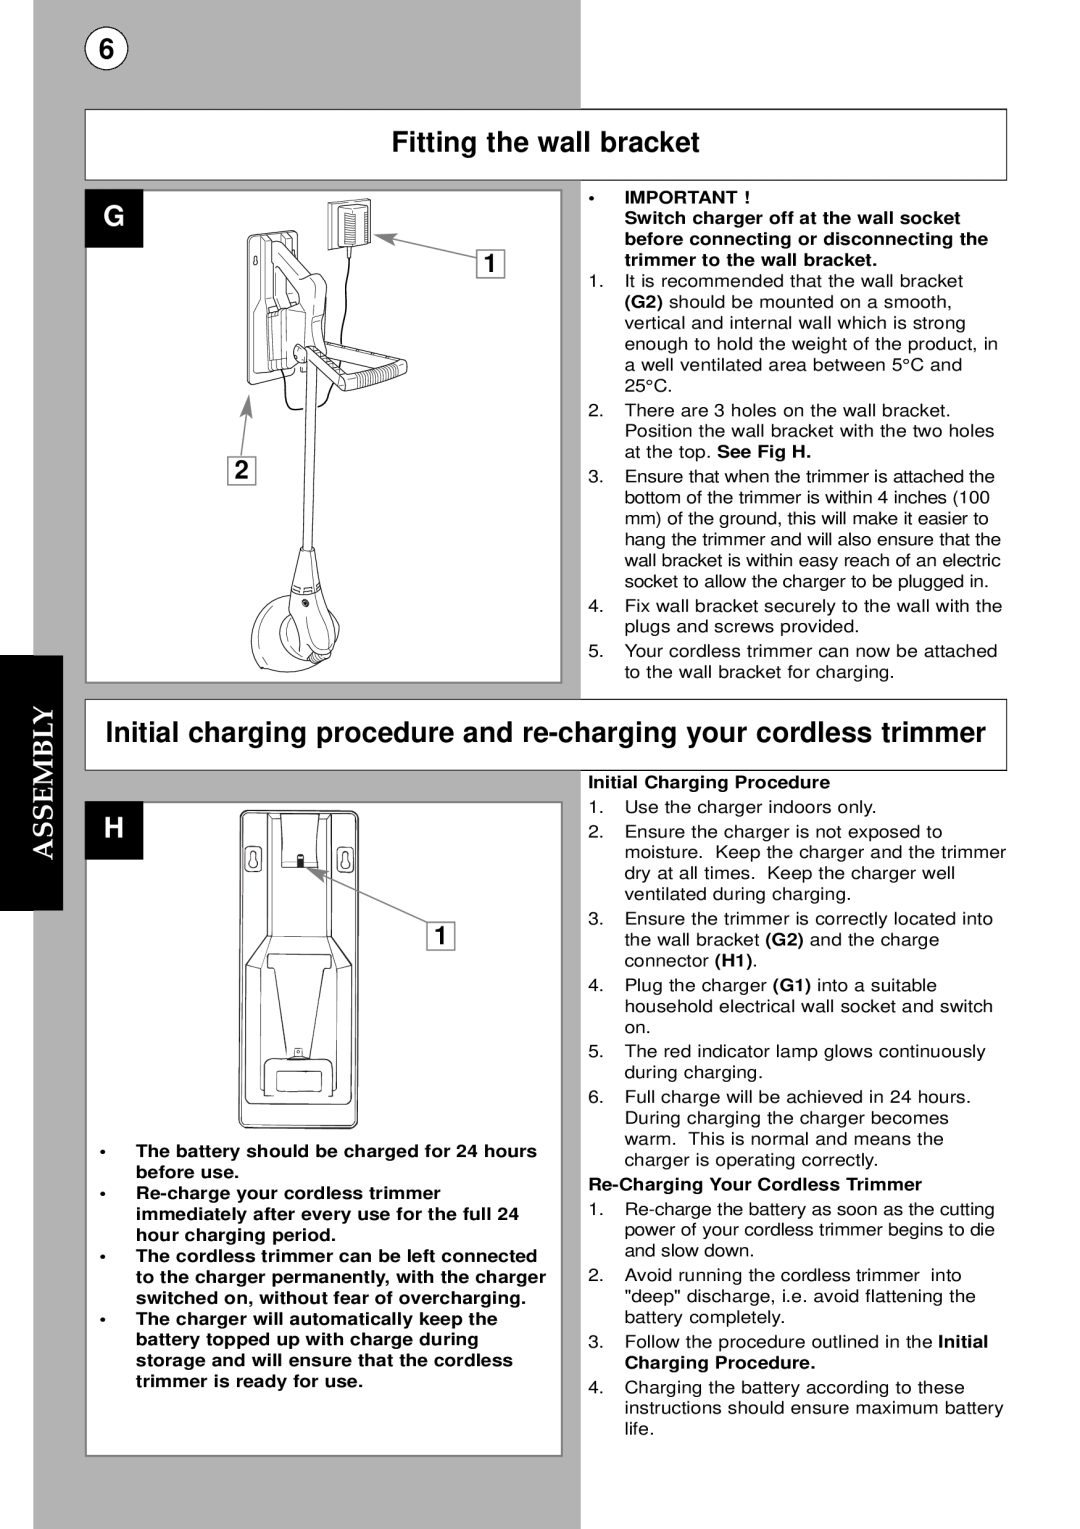 Flymo MCT250 instruction manual Fitting the wall bracket, Assembly 